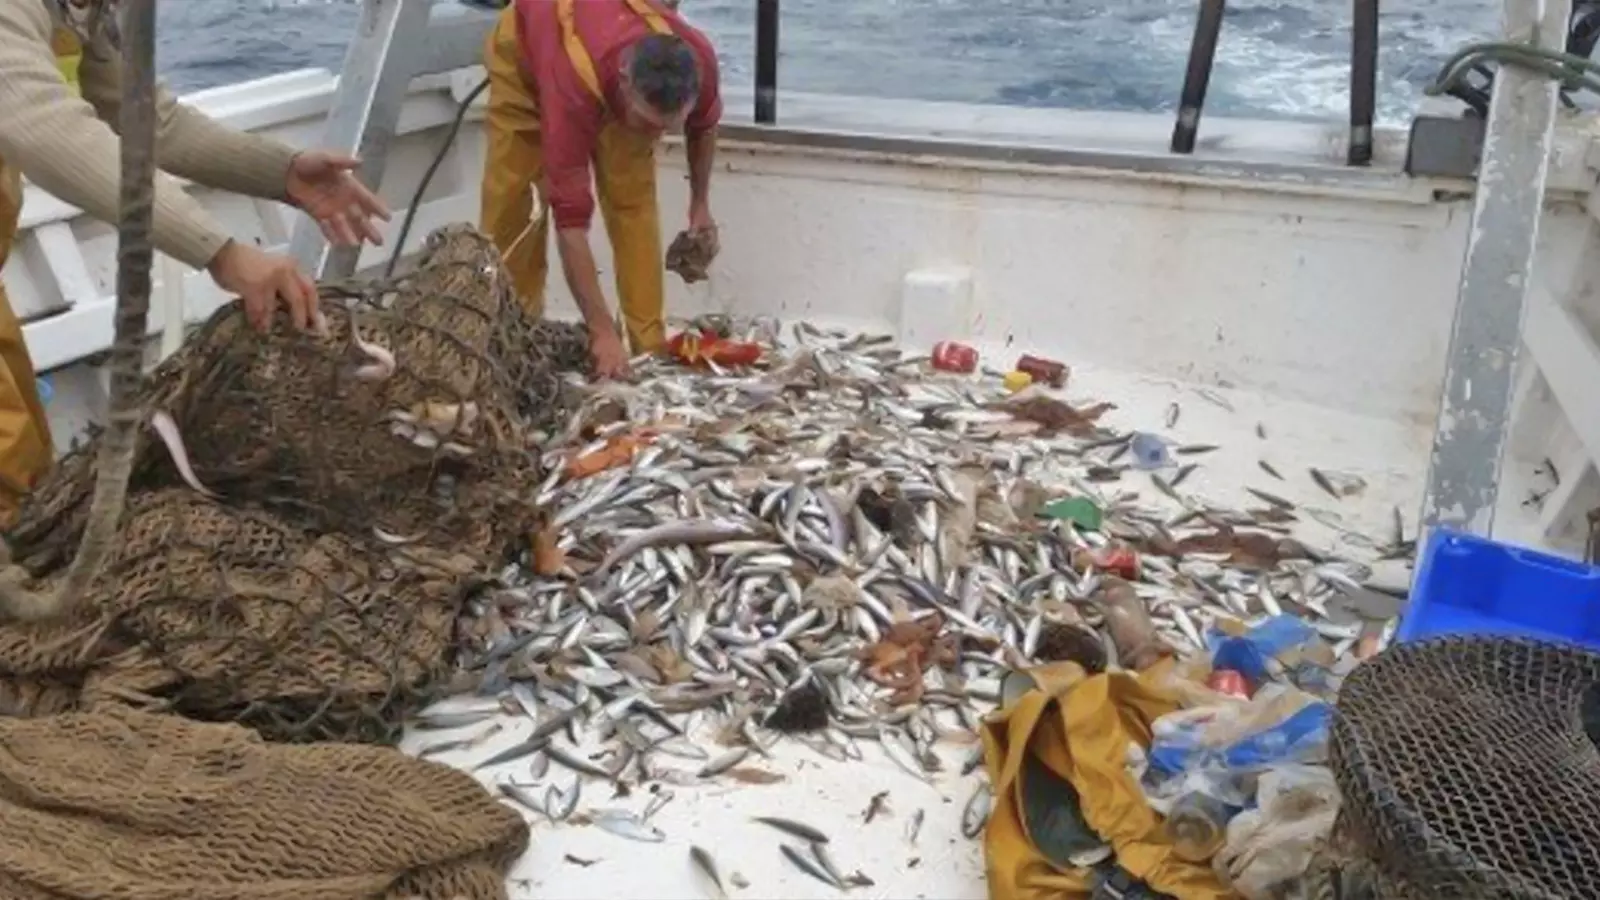 Fishermen collect fish on a boat. If current trends persist, projections suggest that by 2050, the weight of plastics in the ocean will surpass that of fish in the ocean.